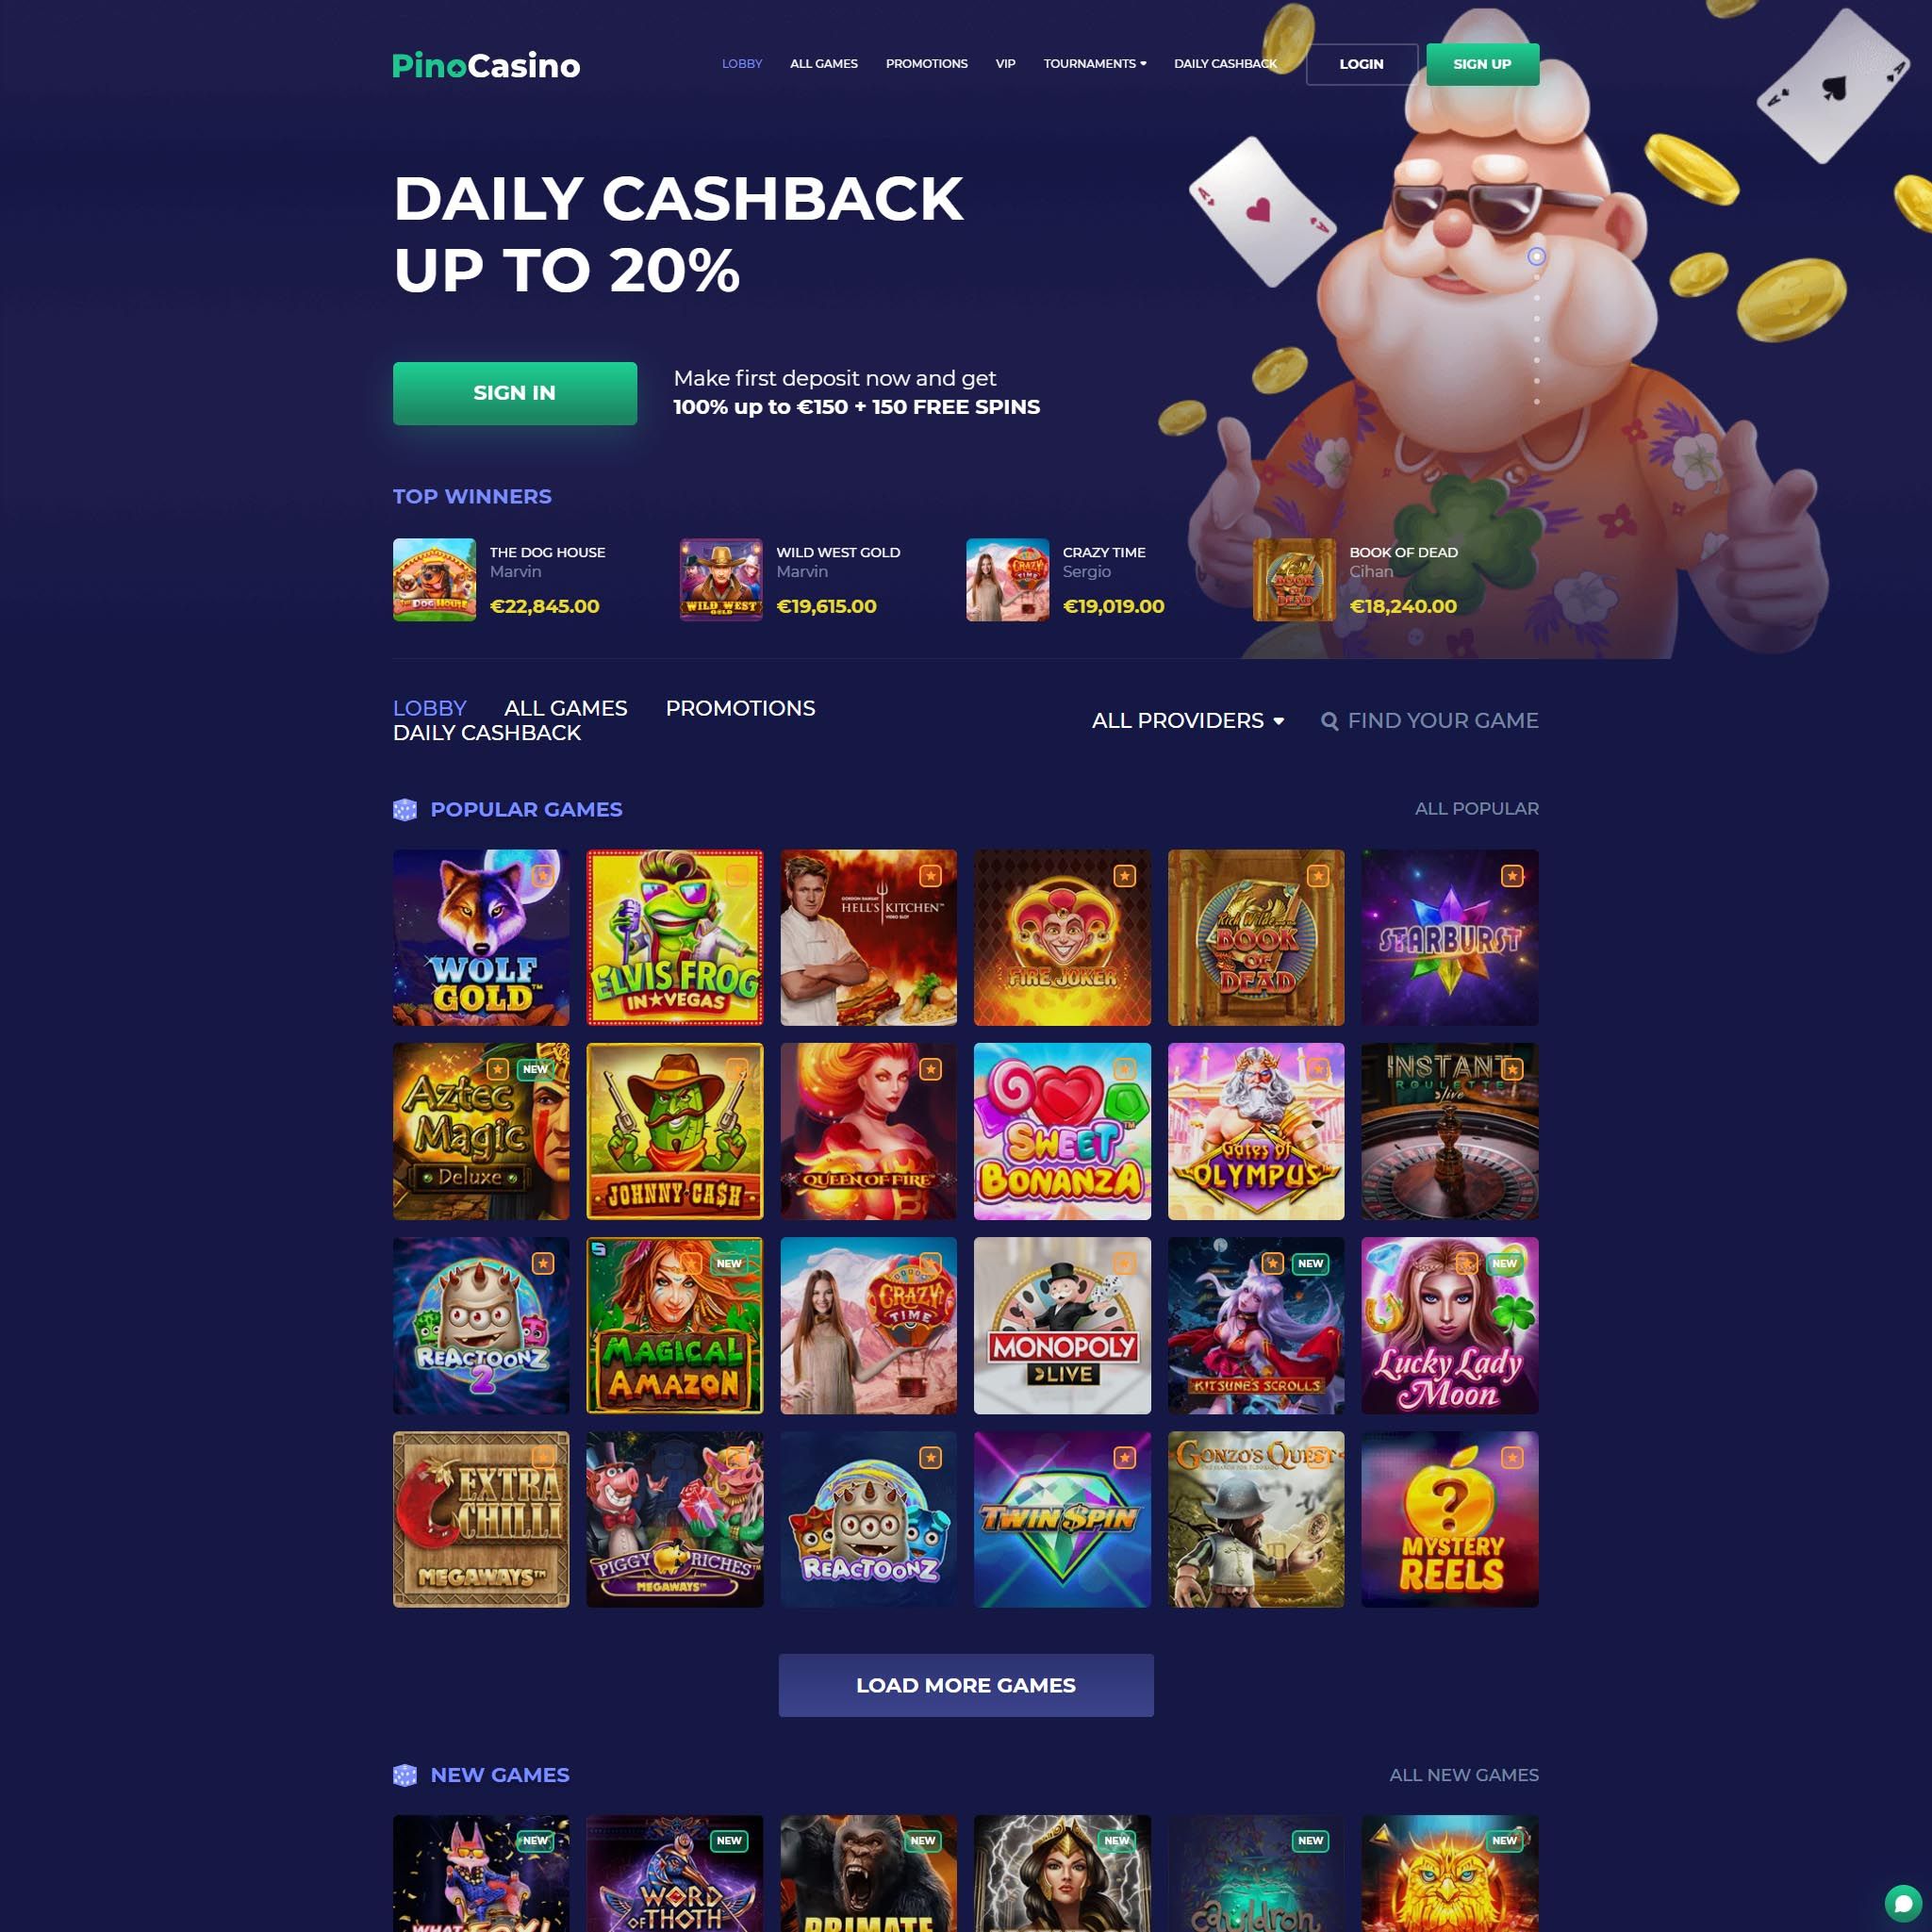 Pino Casino CA review by Mr. Gamble